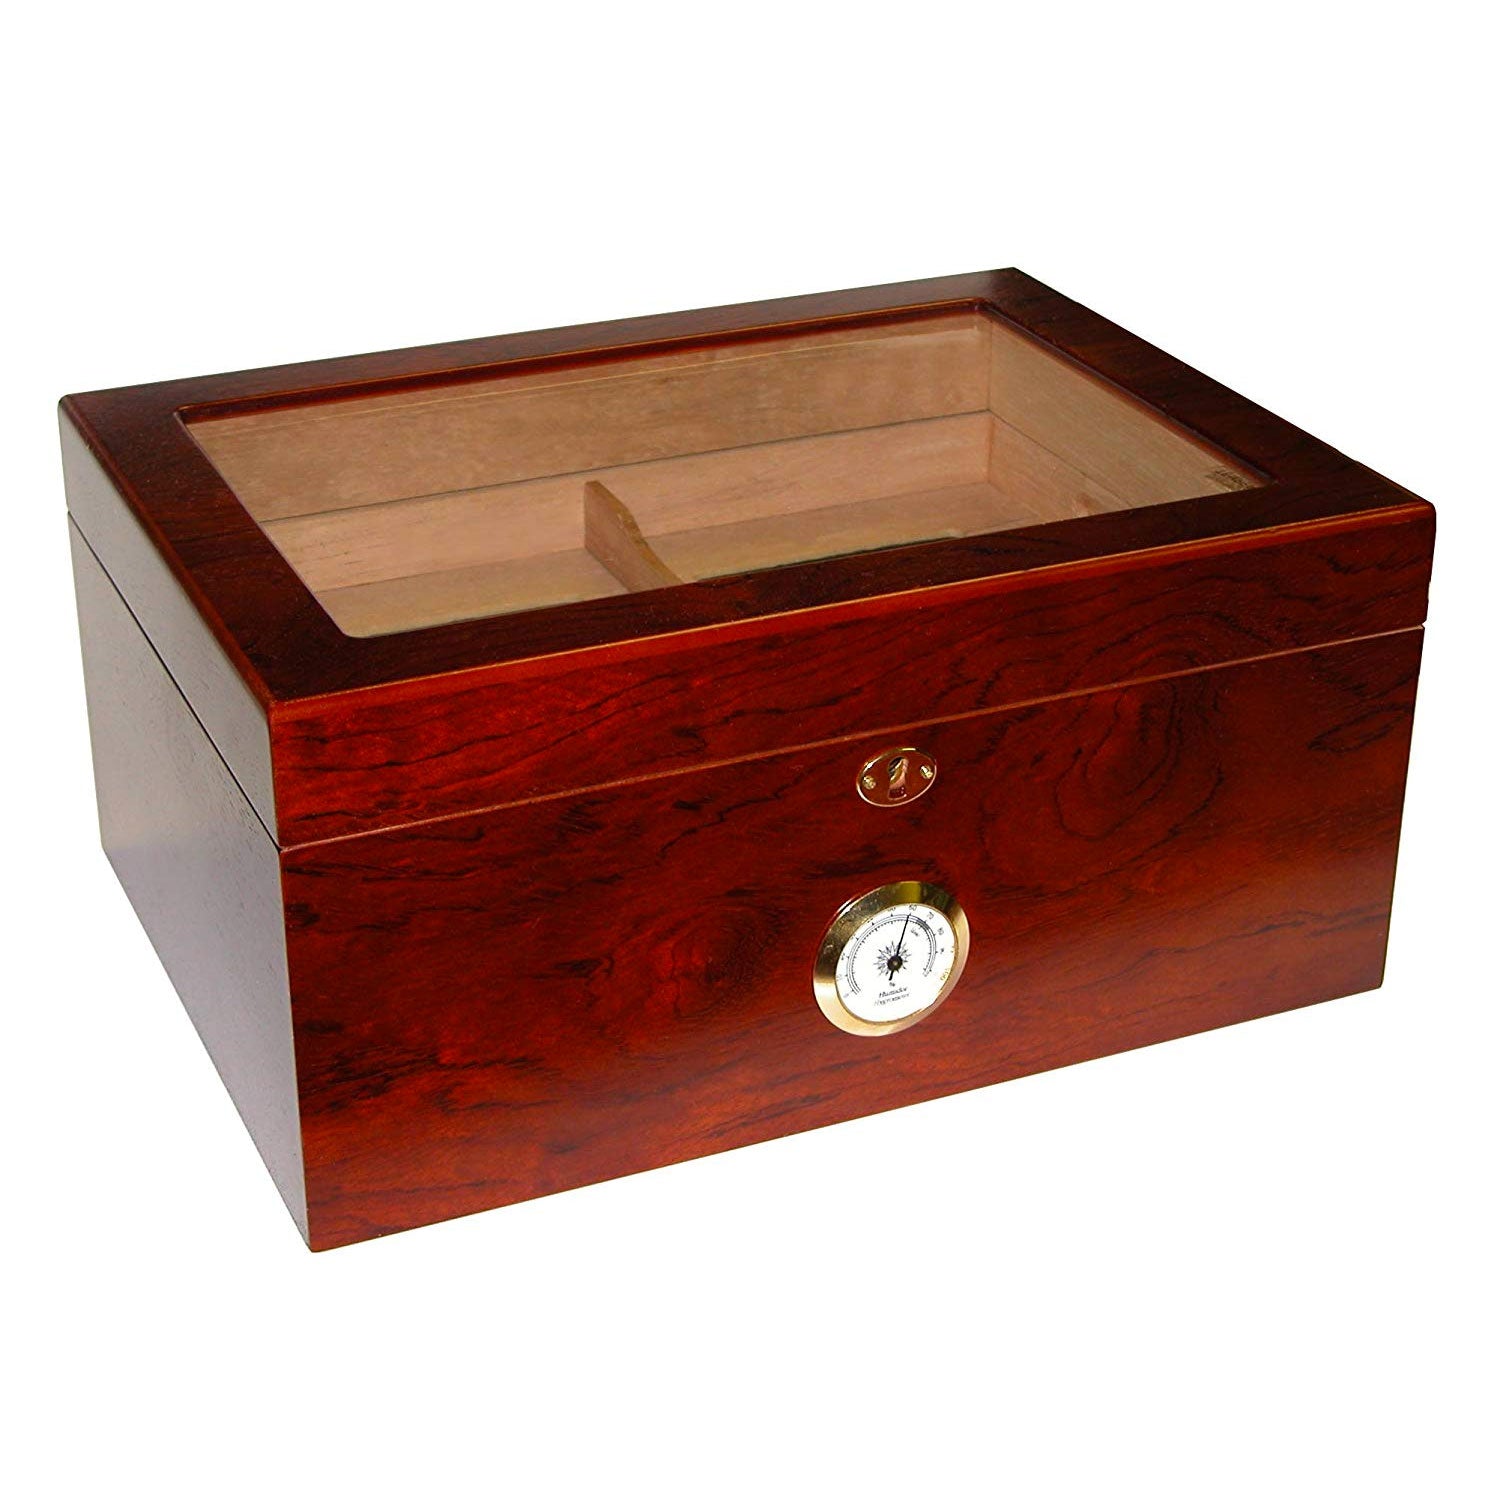 Best Hygrometers For Cigar Humidors (2020)